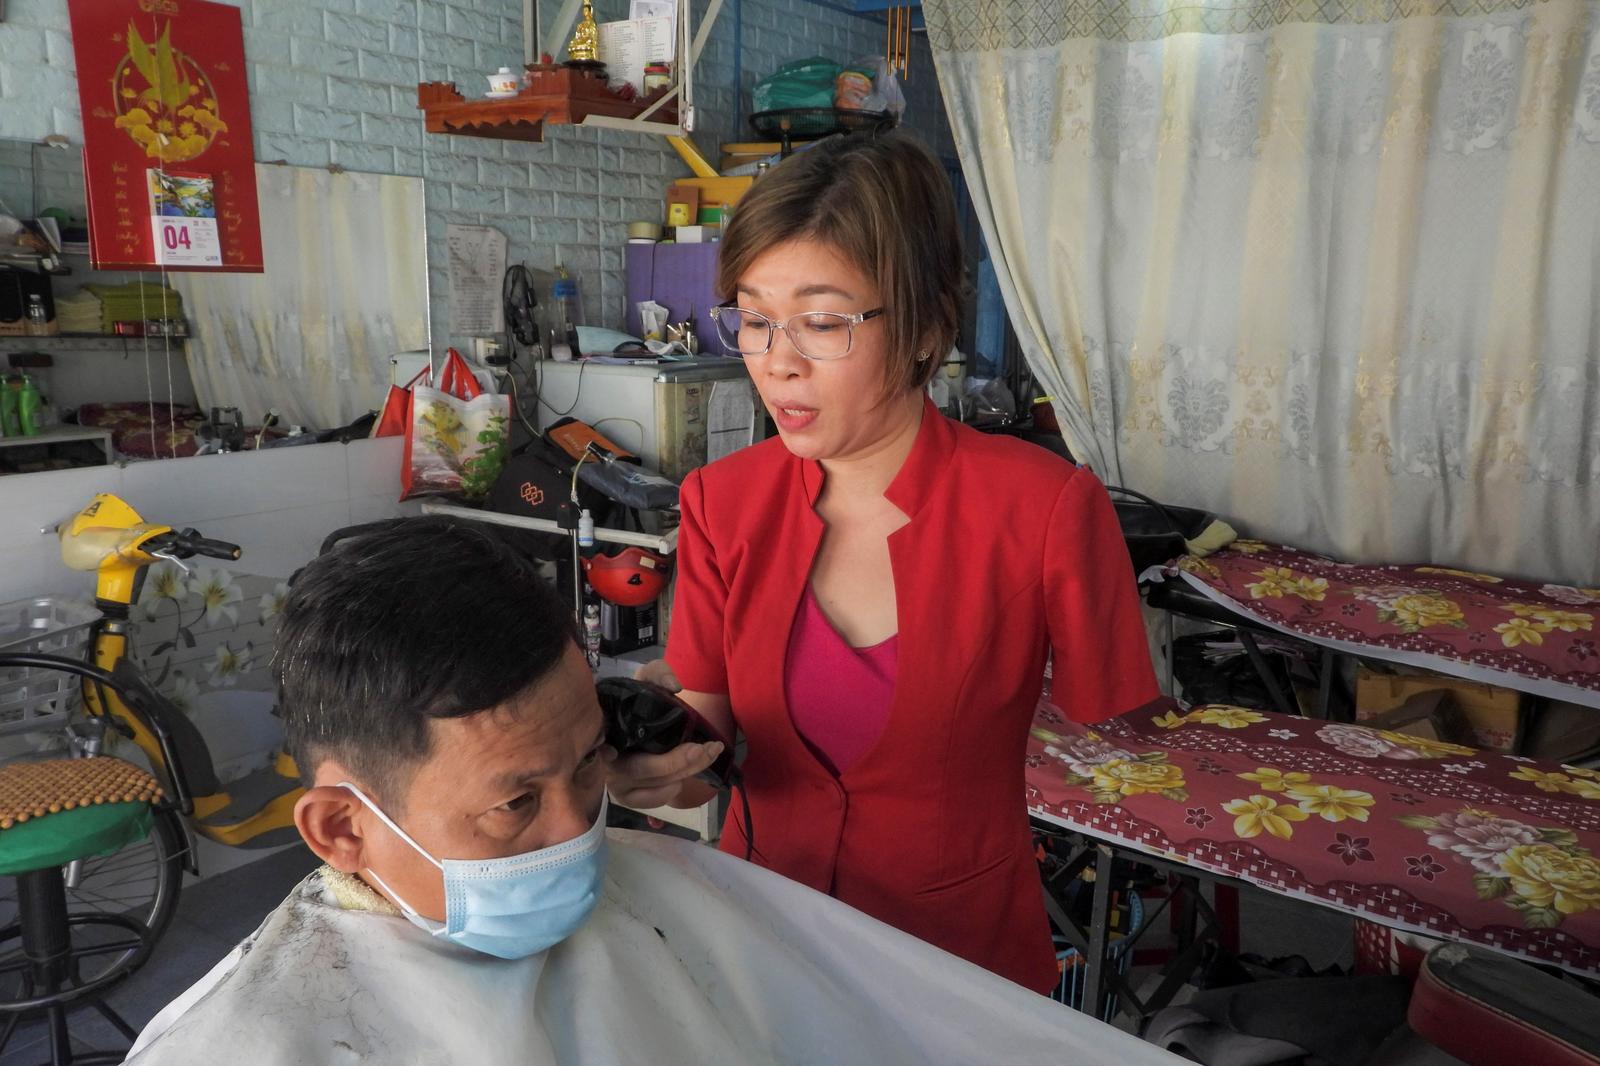 Le Thi Kim Tram, who lost her left arm in a traffic accident four years ago, works at her barbershop in Ho Chi Minh City, Vietnam March 5, 2021. Picture taken March 5, 2021. Photo: Reuters